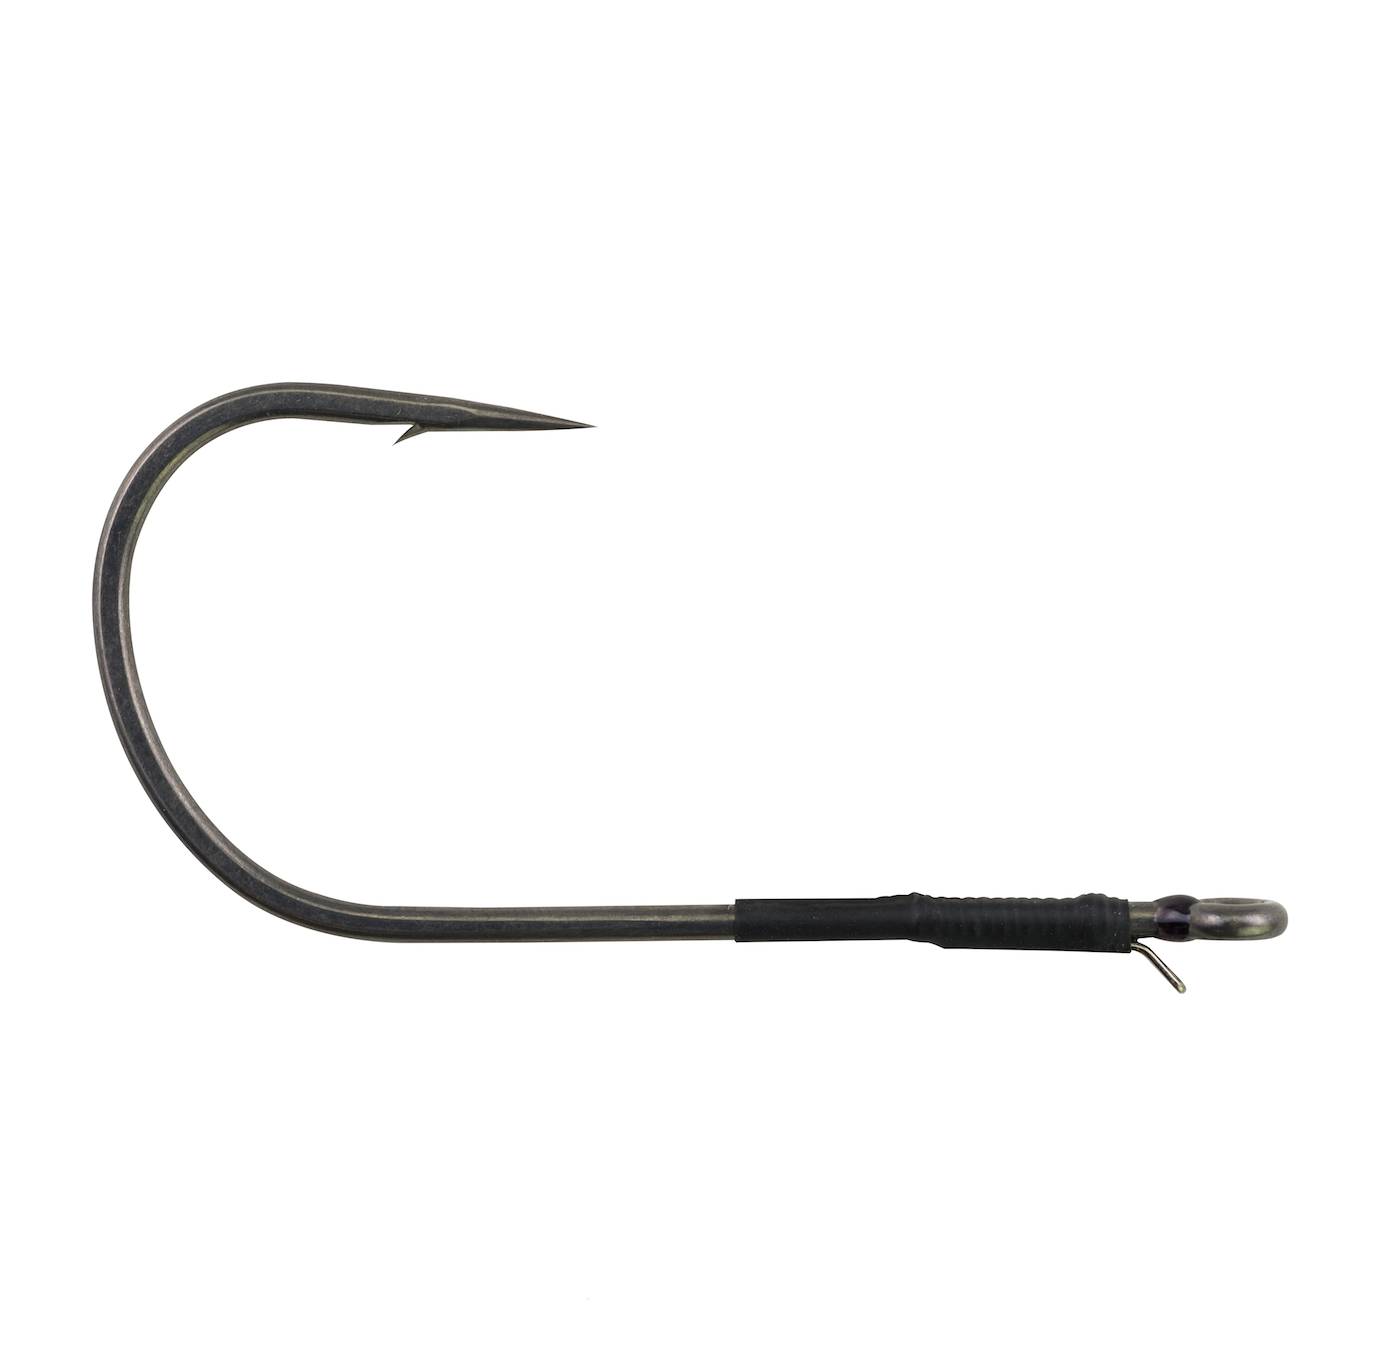 Size 6/0 #1362181 Berkley Fusion19 Weighted Swimbait Fishing Hook 4 count 